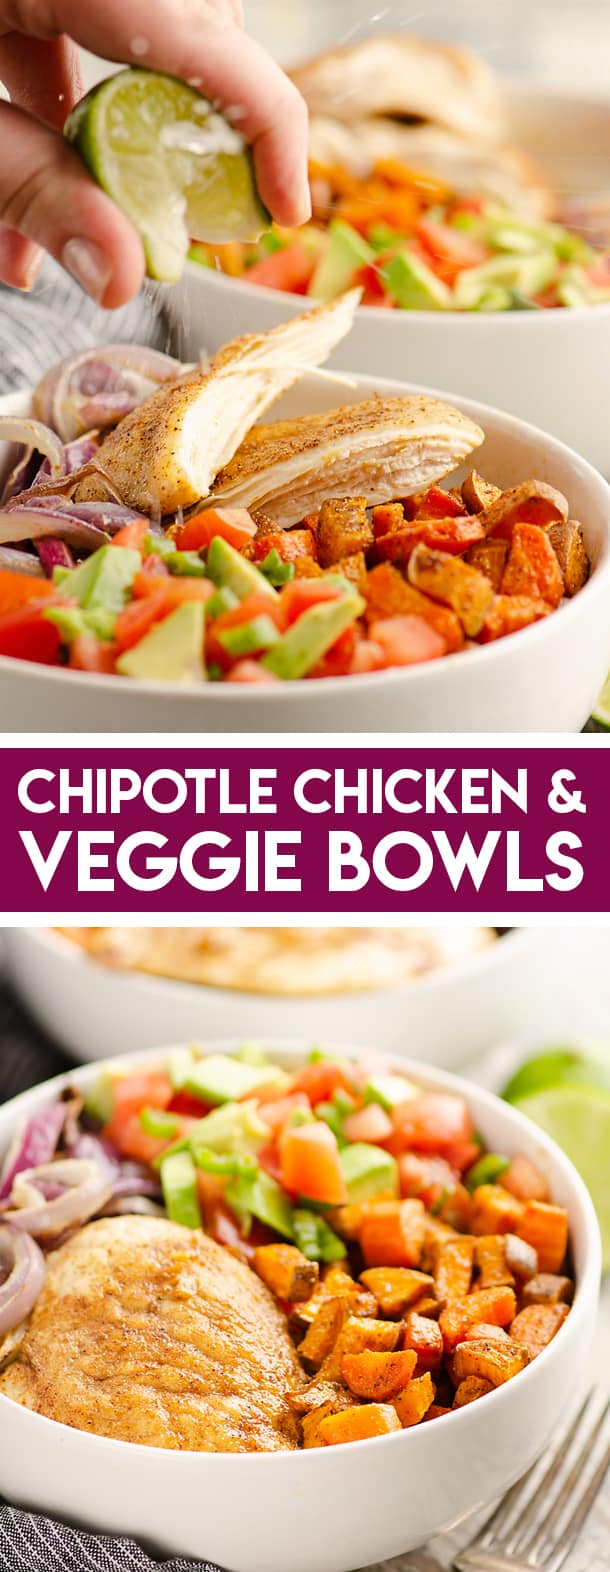 Chipotle Chicken & Southwest Root Vegetable Bowls